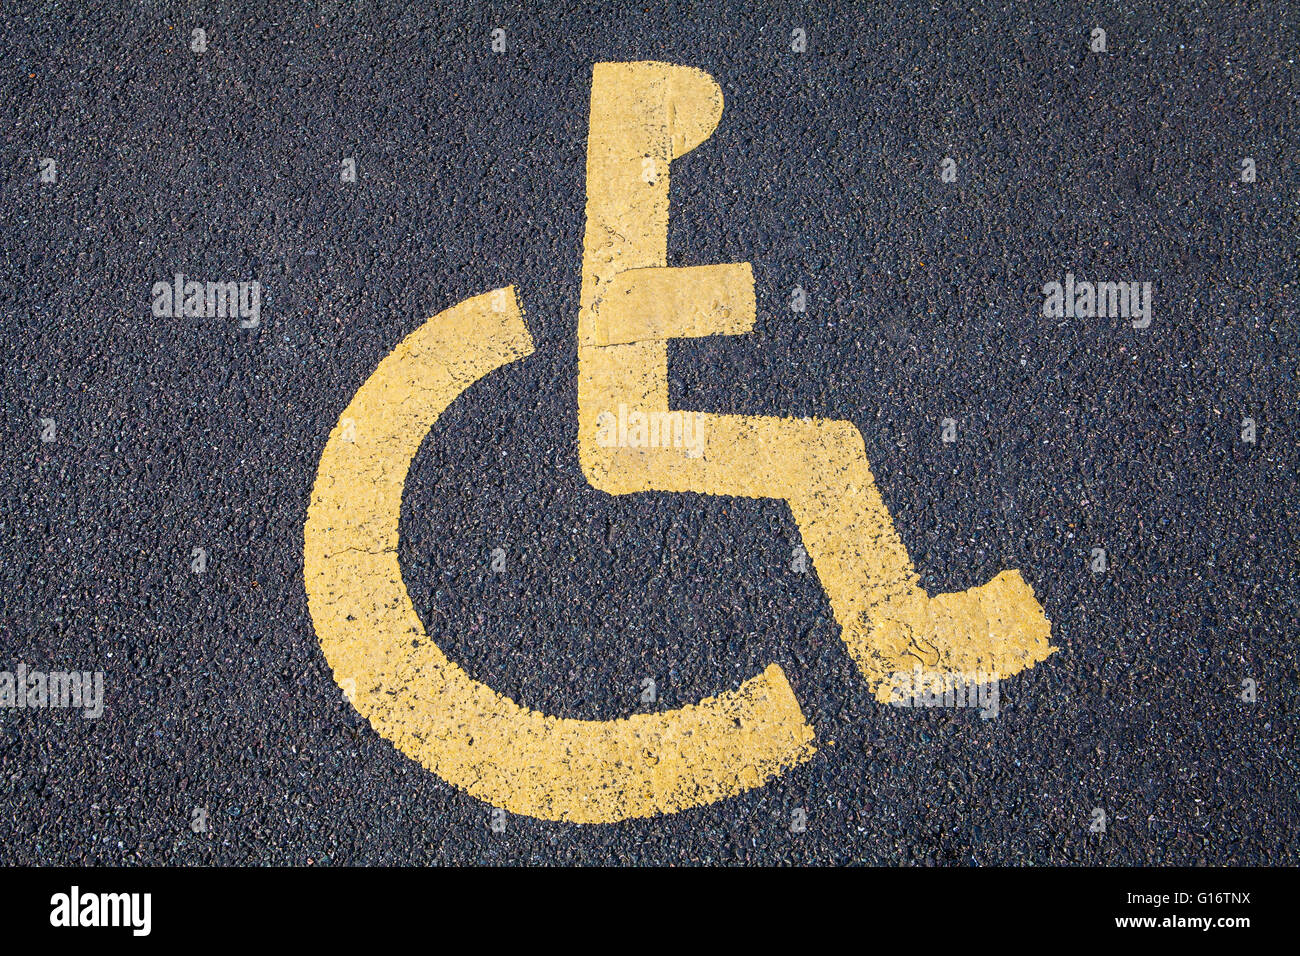 The Disabled symbol painted on a Road. Stock Photo